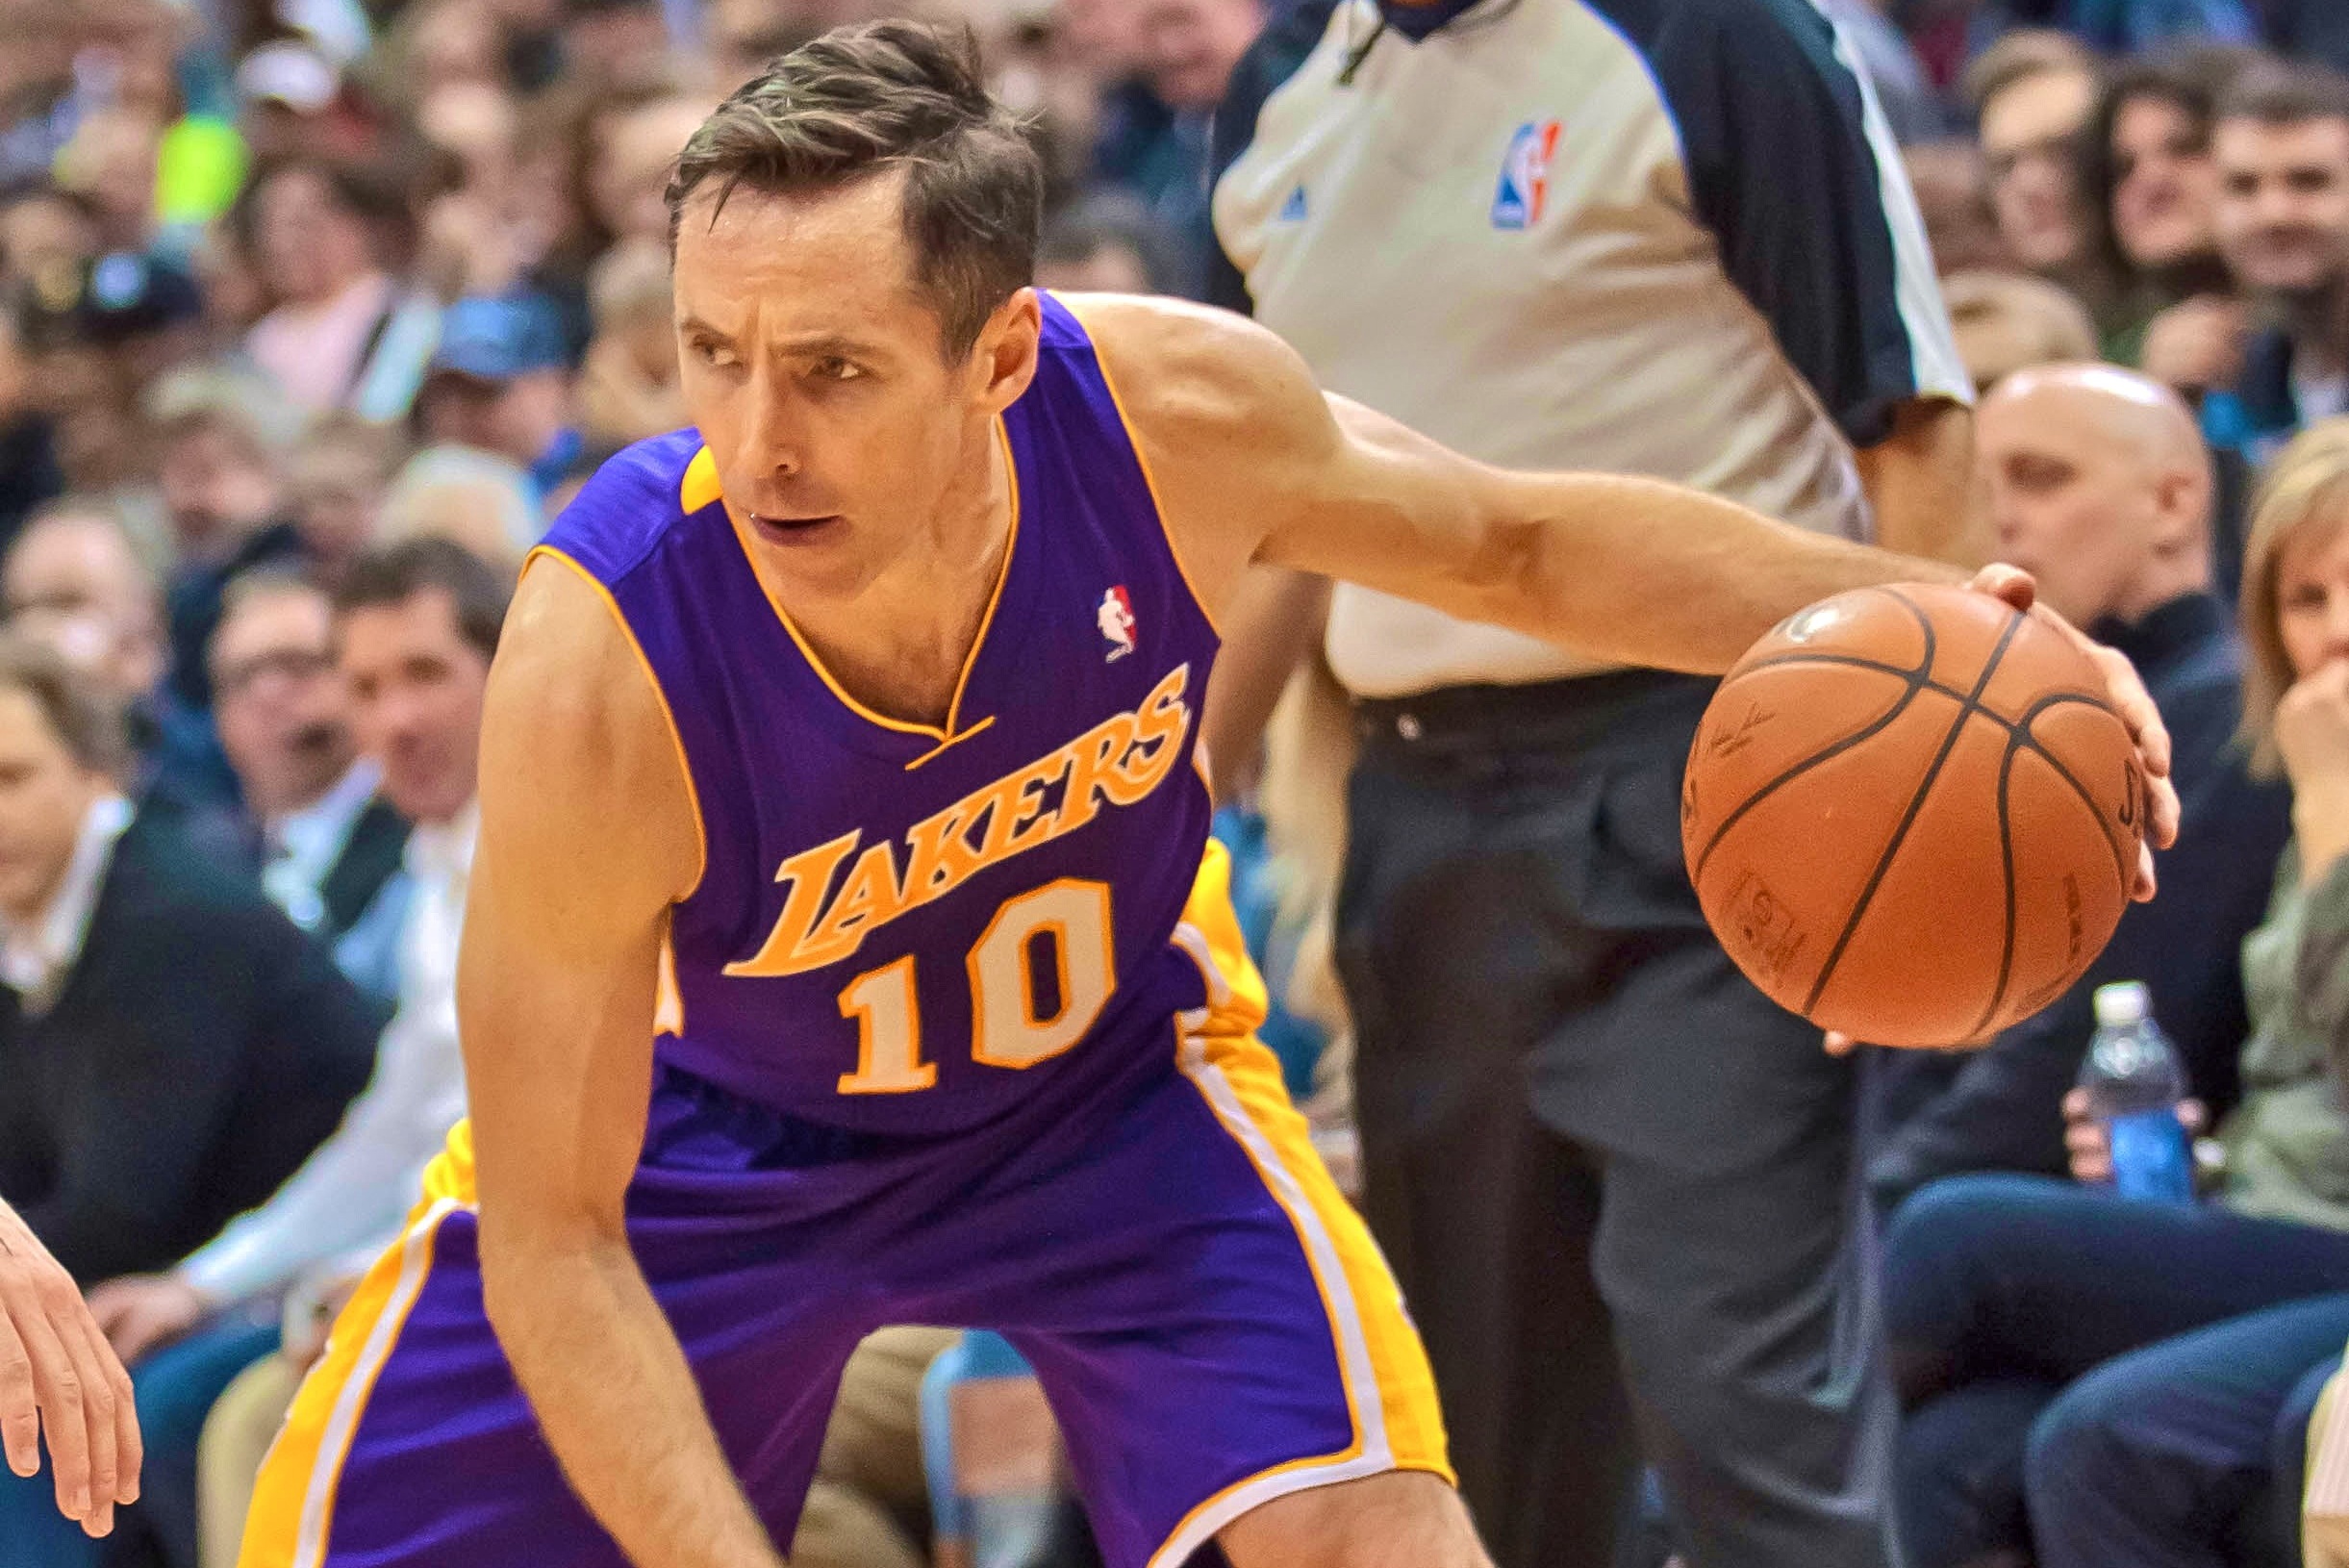 Steve Nash calls time with Lakers an incredible experience and